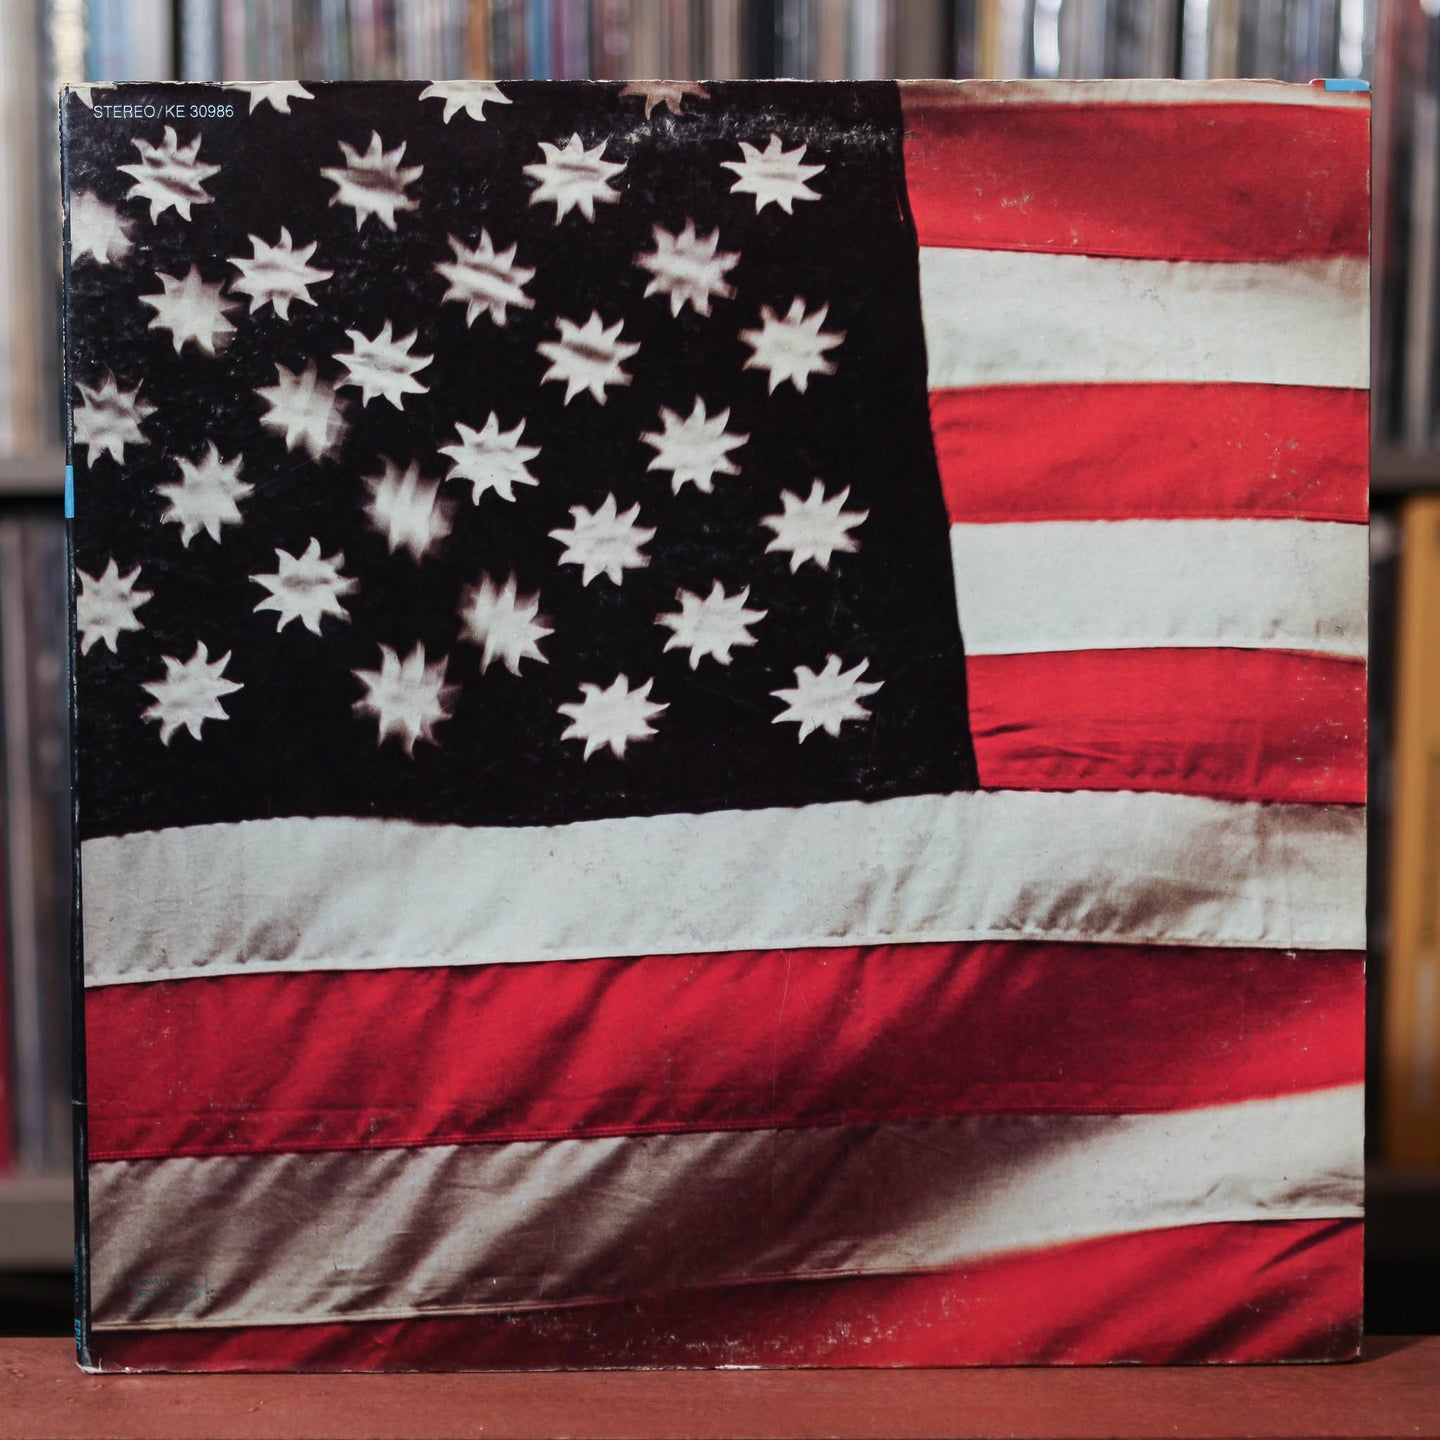 Sly & The Family Stone -There's A Riot Goin' On - 1971 Epic, VG+/VG